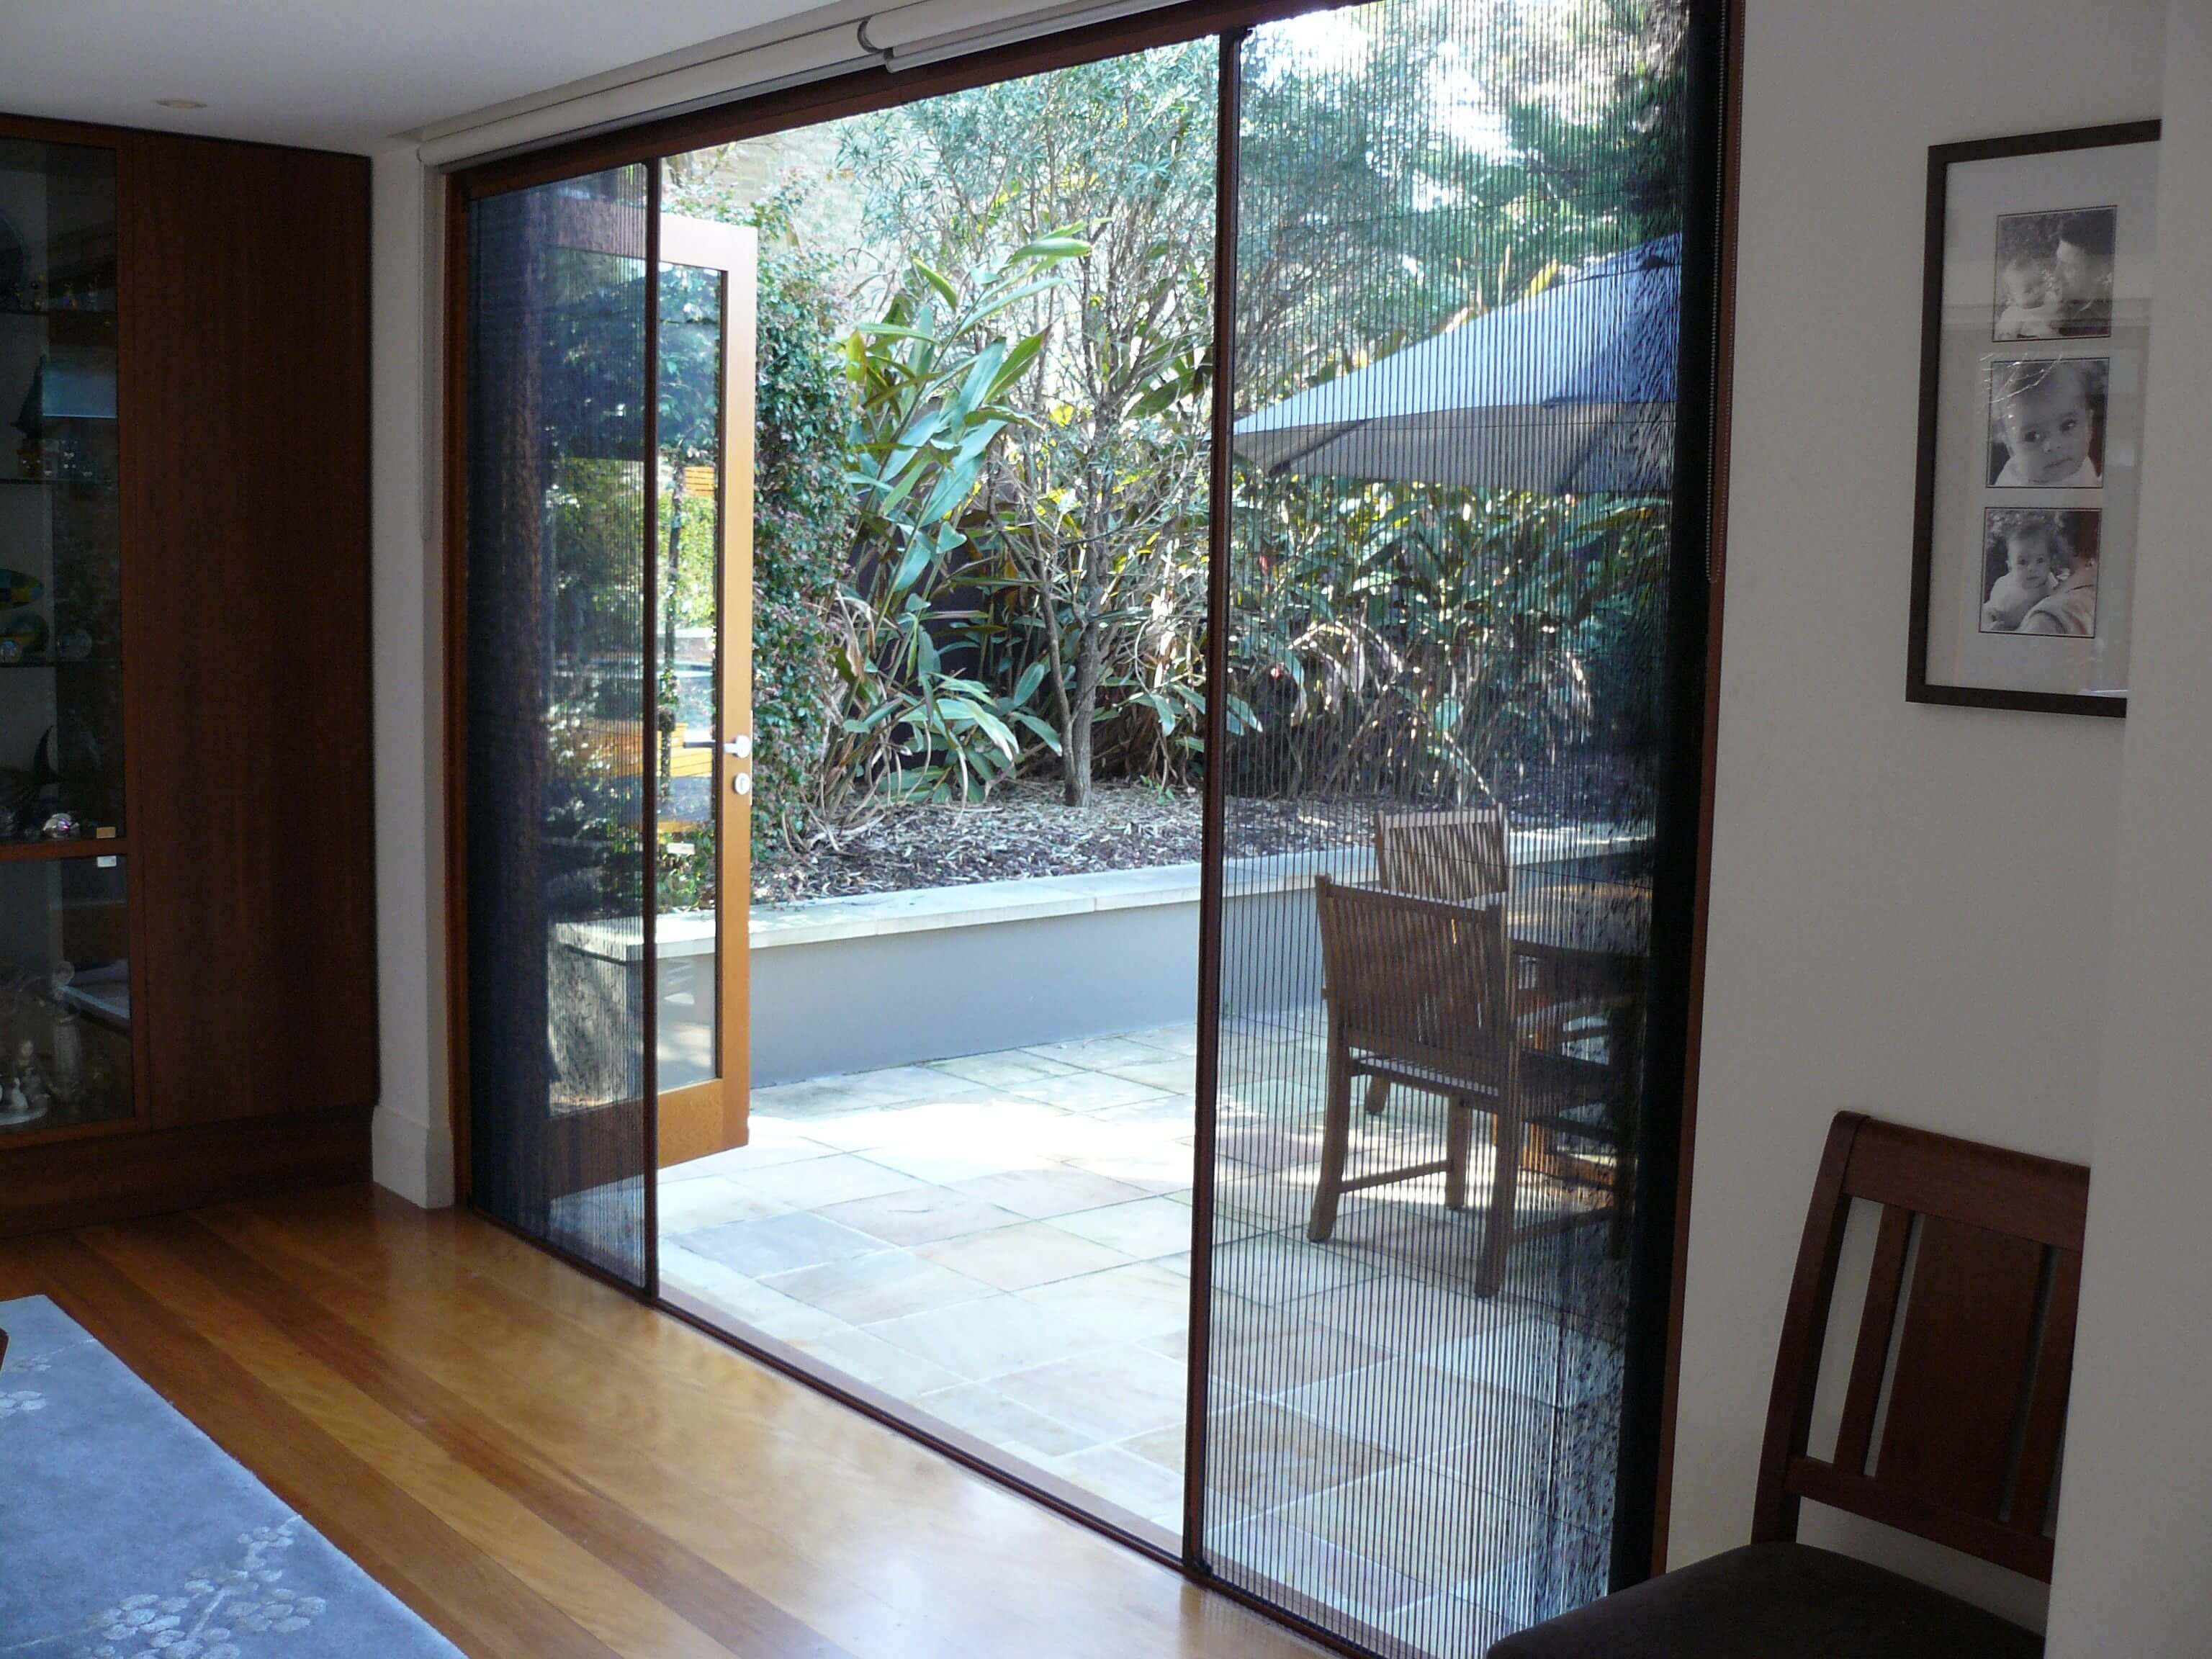 Spectra Offers A Large Range Of Mosquito Netting Systems For Doors Windows Such As Roller Mosquito Meshes Pl Windows And Doors Sliding Screen Doors Net Door